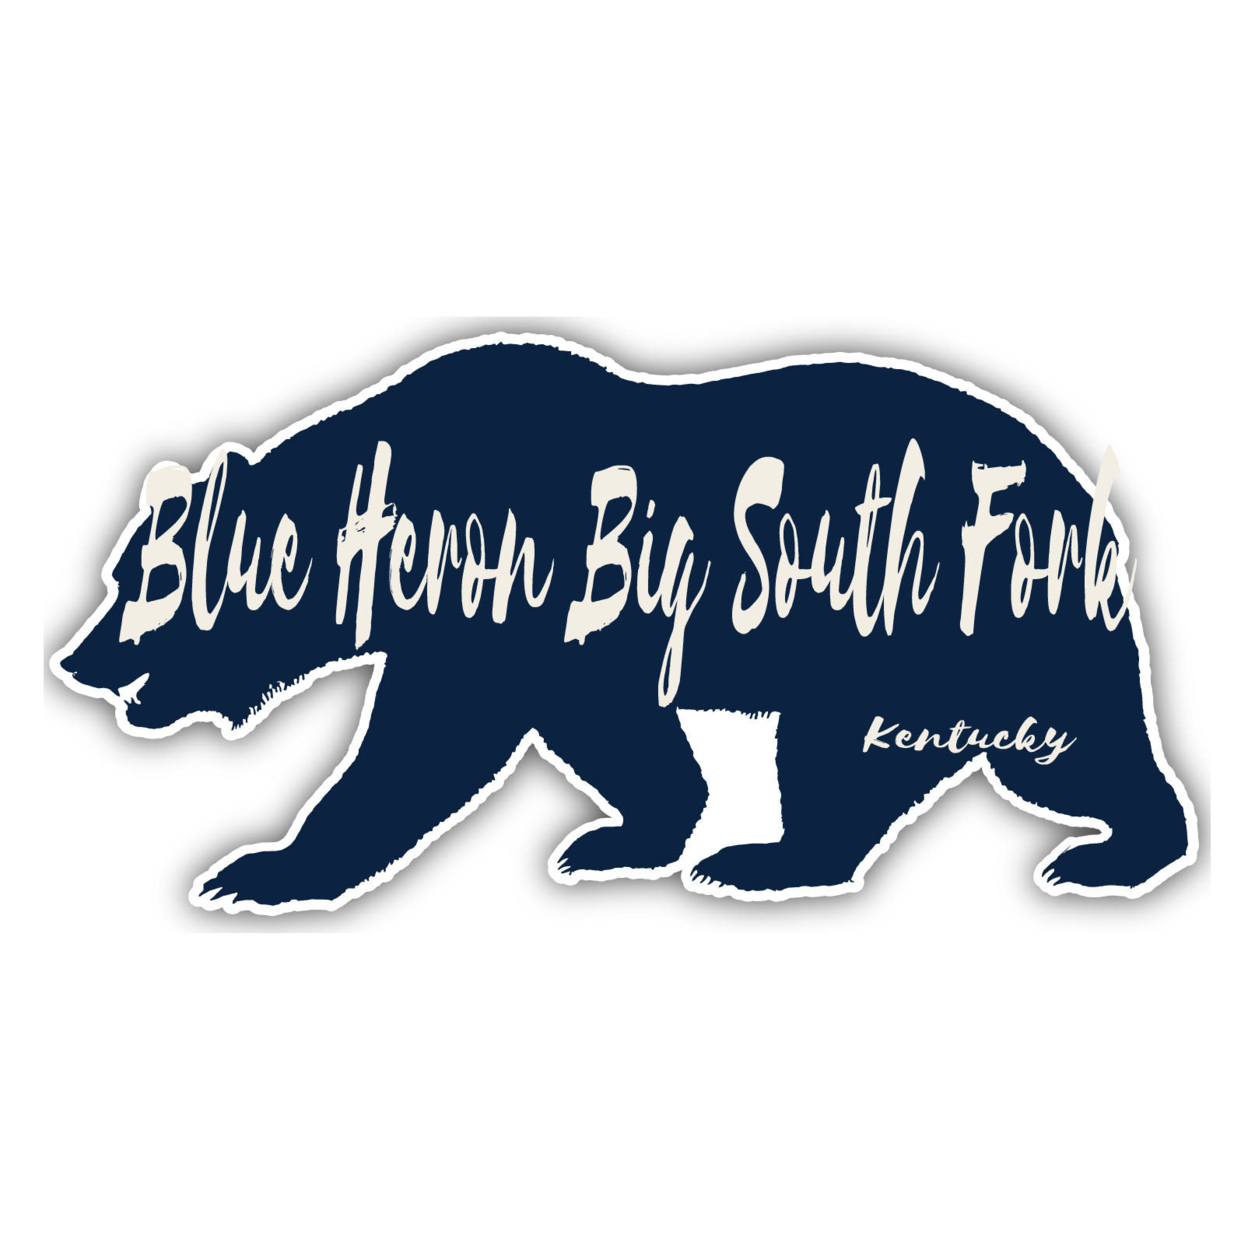 Blue Heron Big South Fork Kentucky Souvenir Decorative Stickers (Choose Theme And Size) - 4-Pack, 6-Inch, Bear